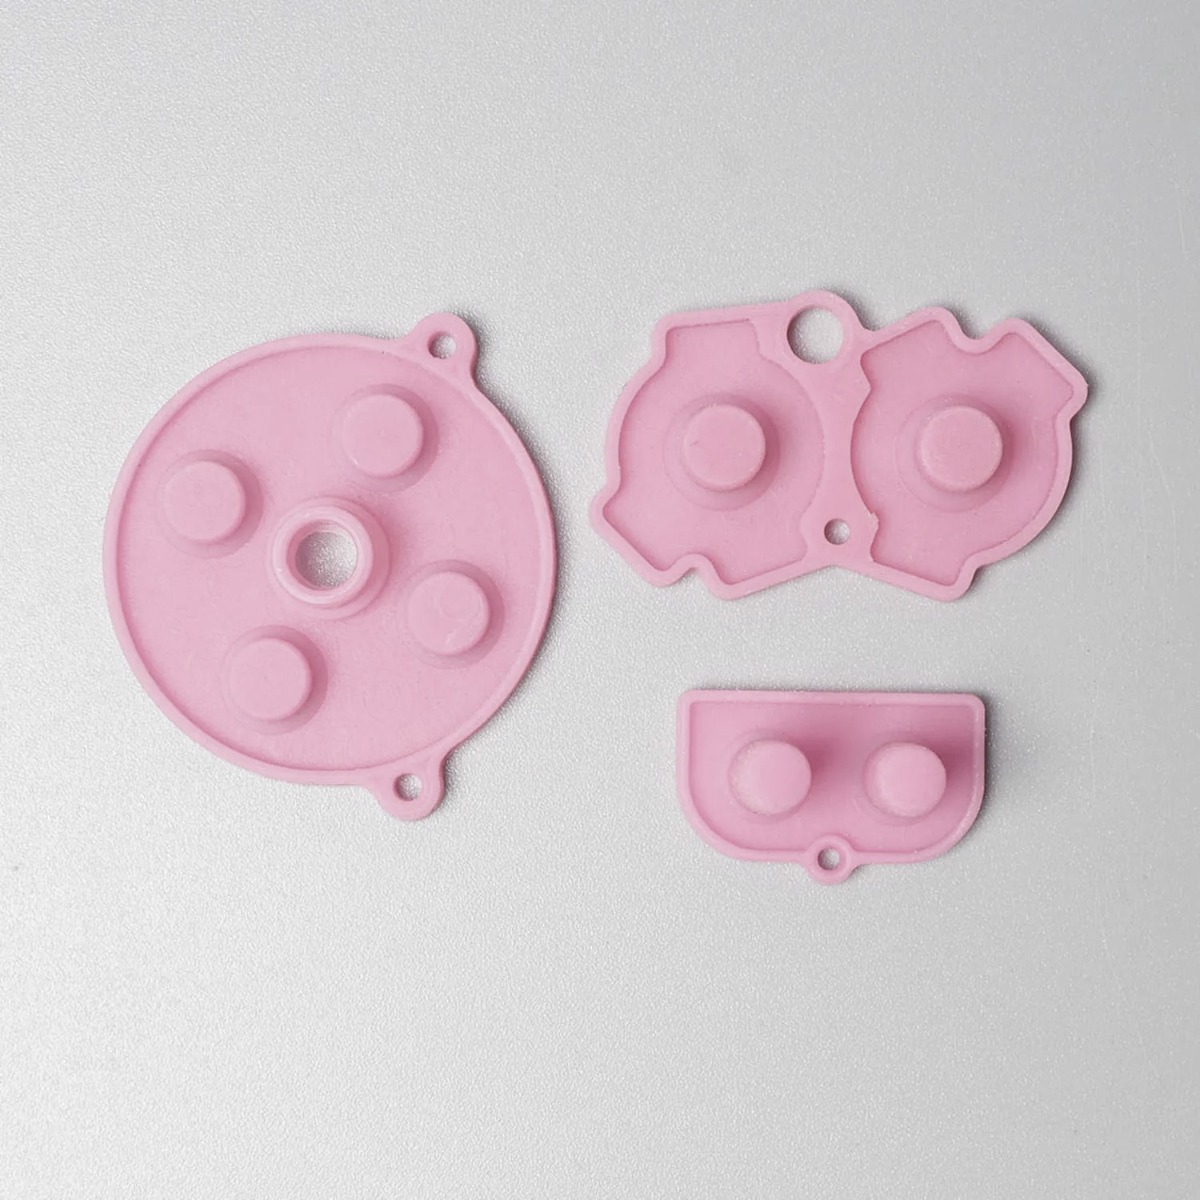 Game Boy Advance Silicone Pads (Light Pink)